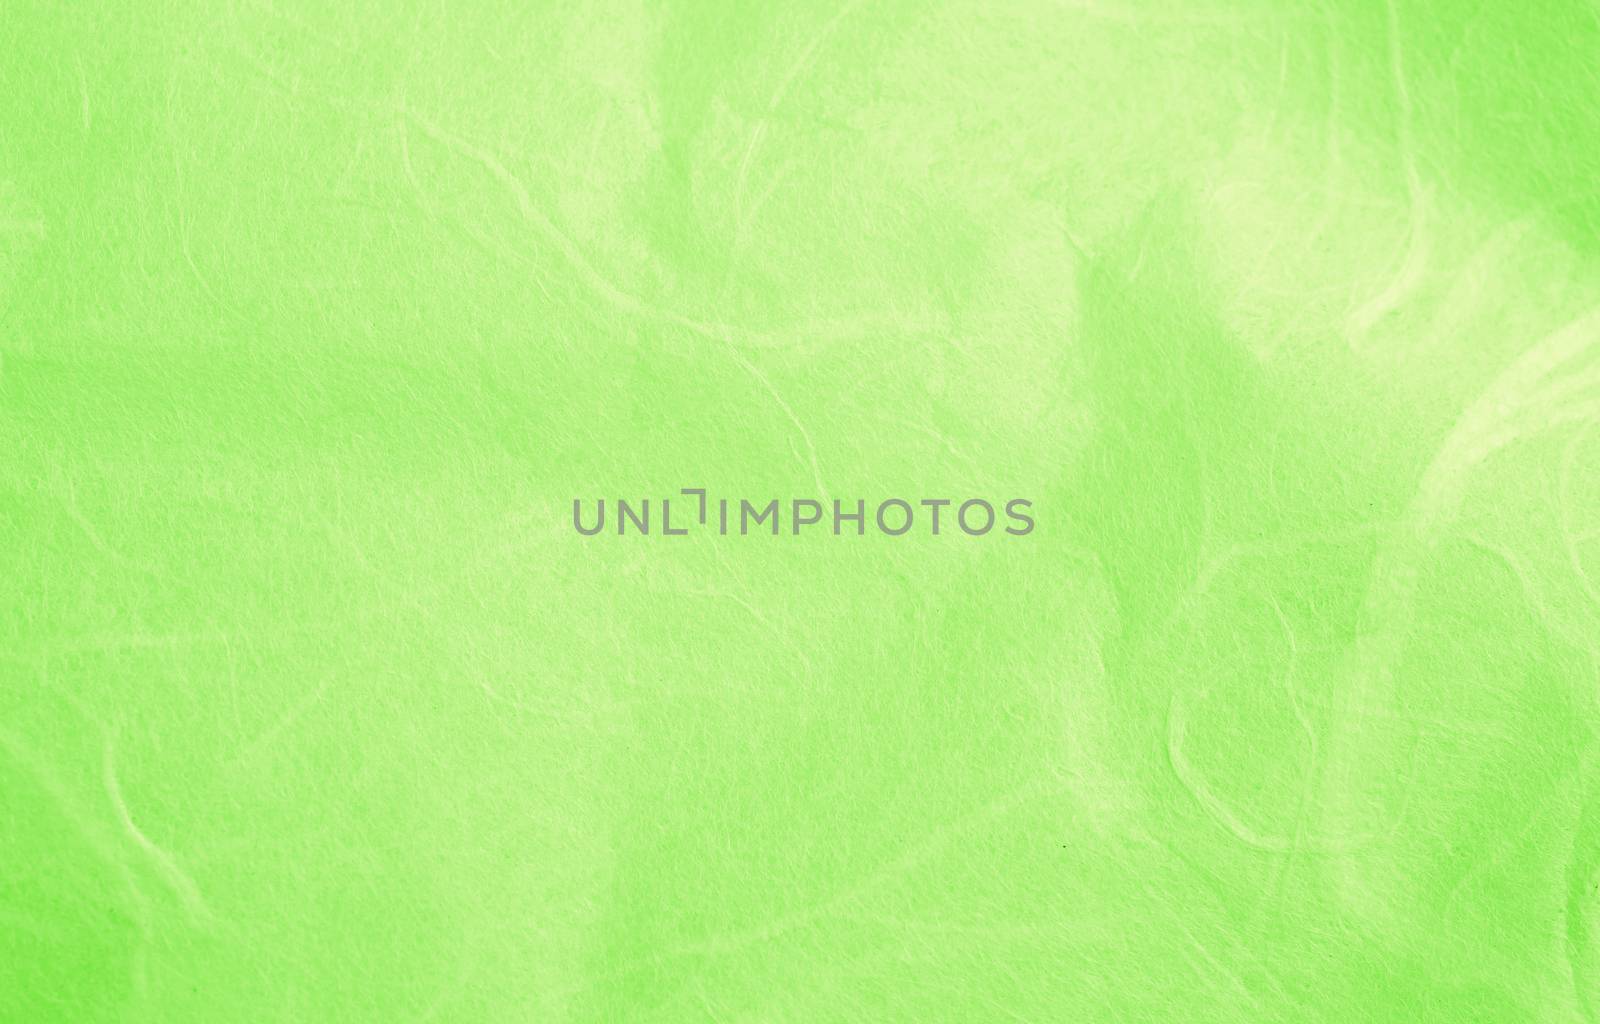 abstract mulberry paper texture green for background